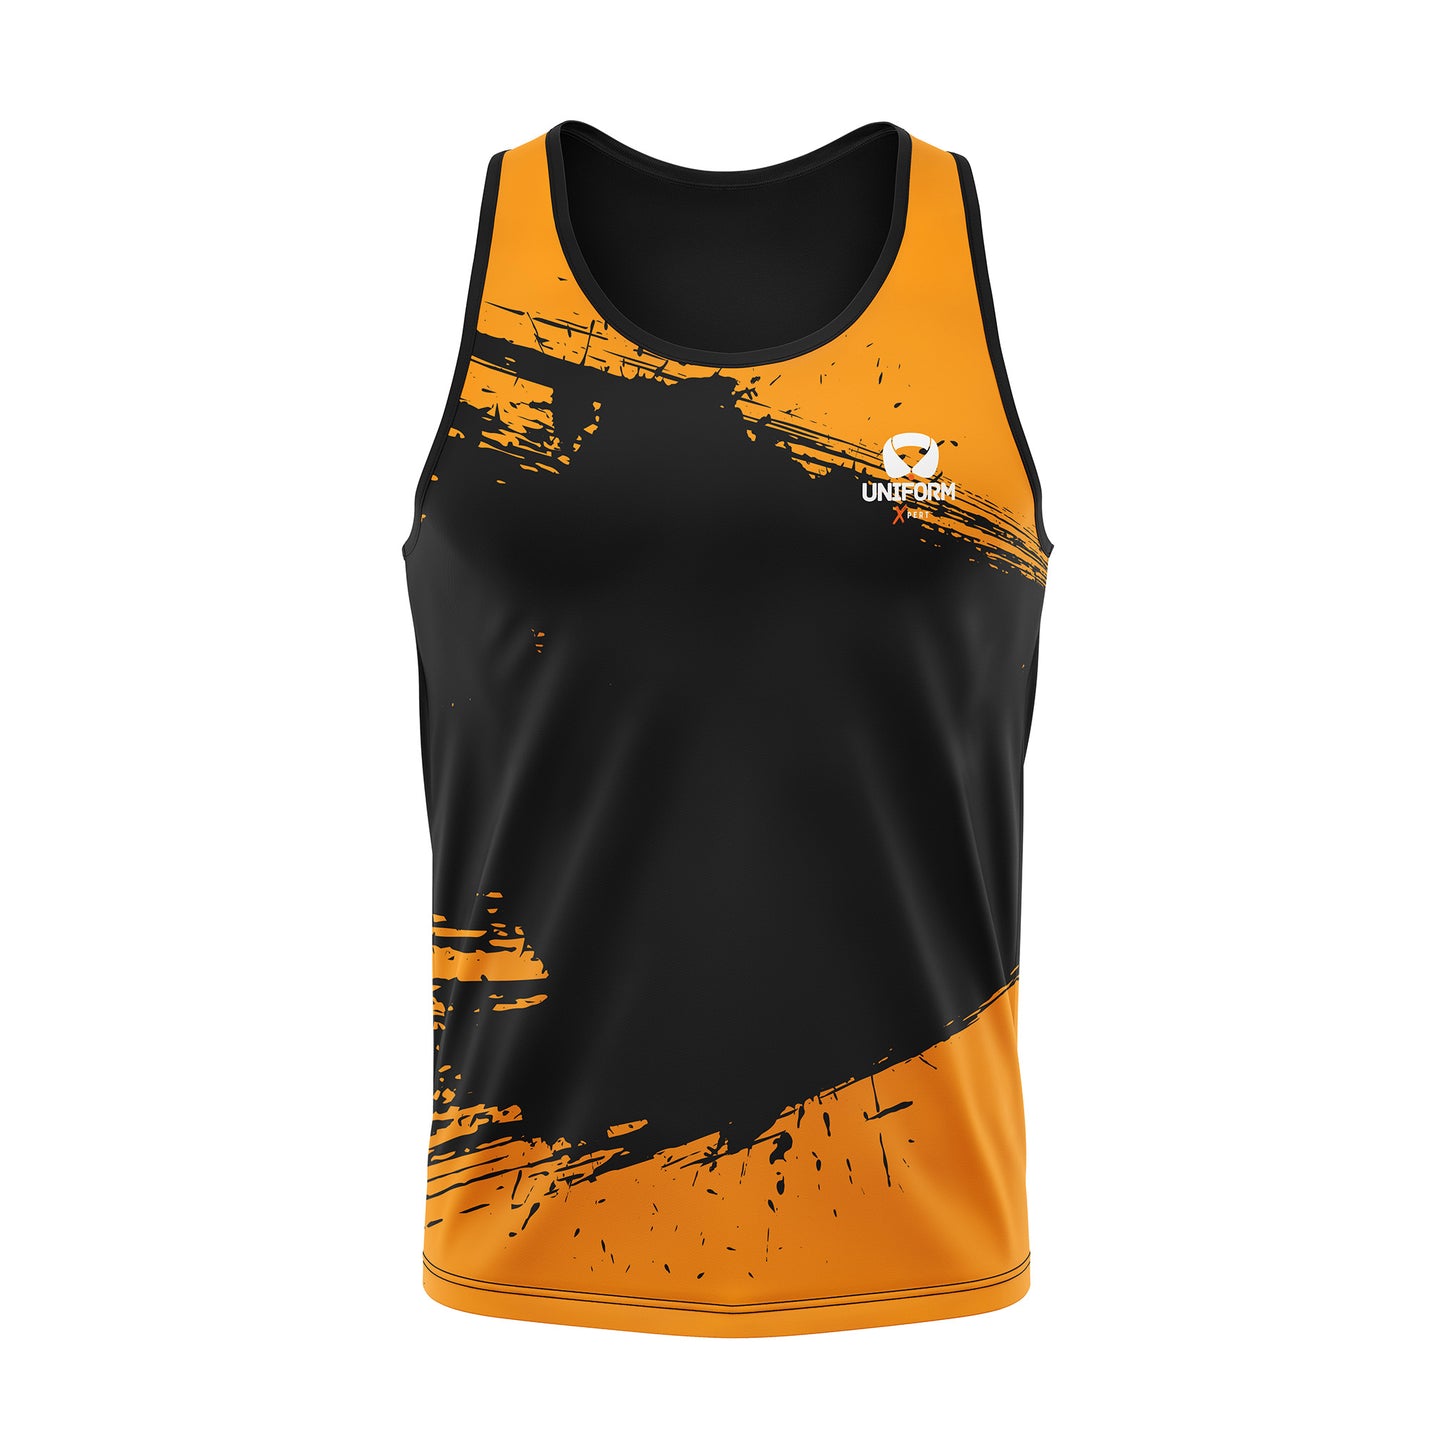 Custom Tank Tops | Tailored Sportswear for Active Living